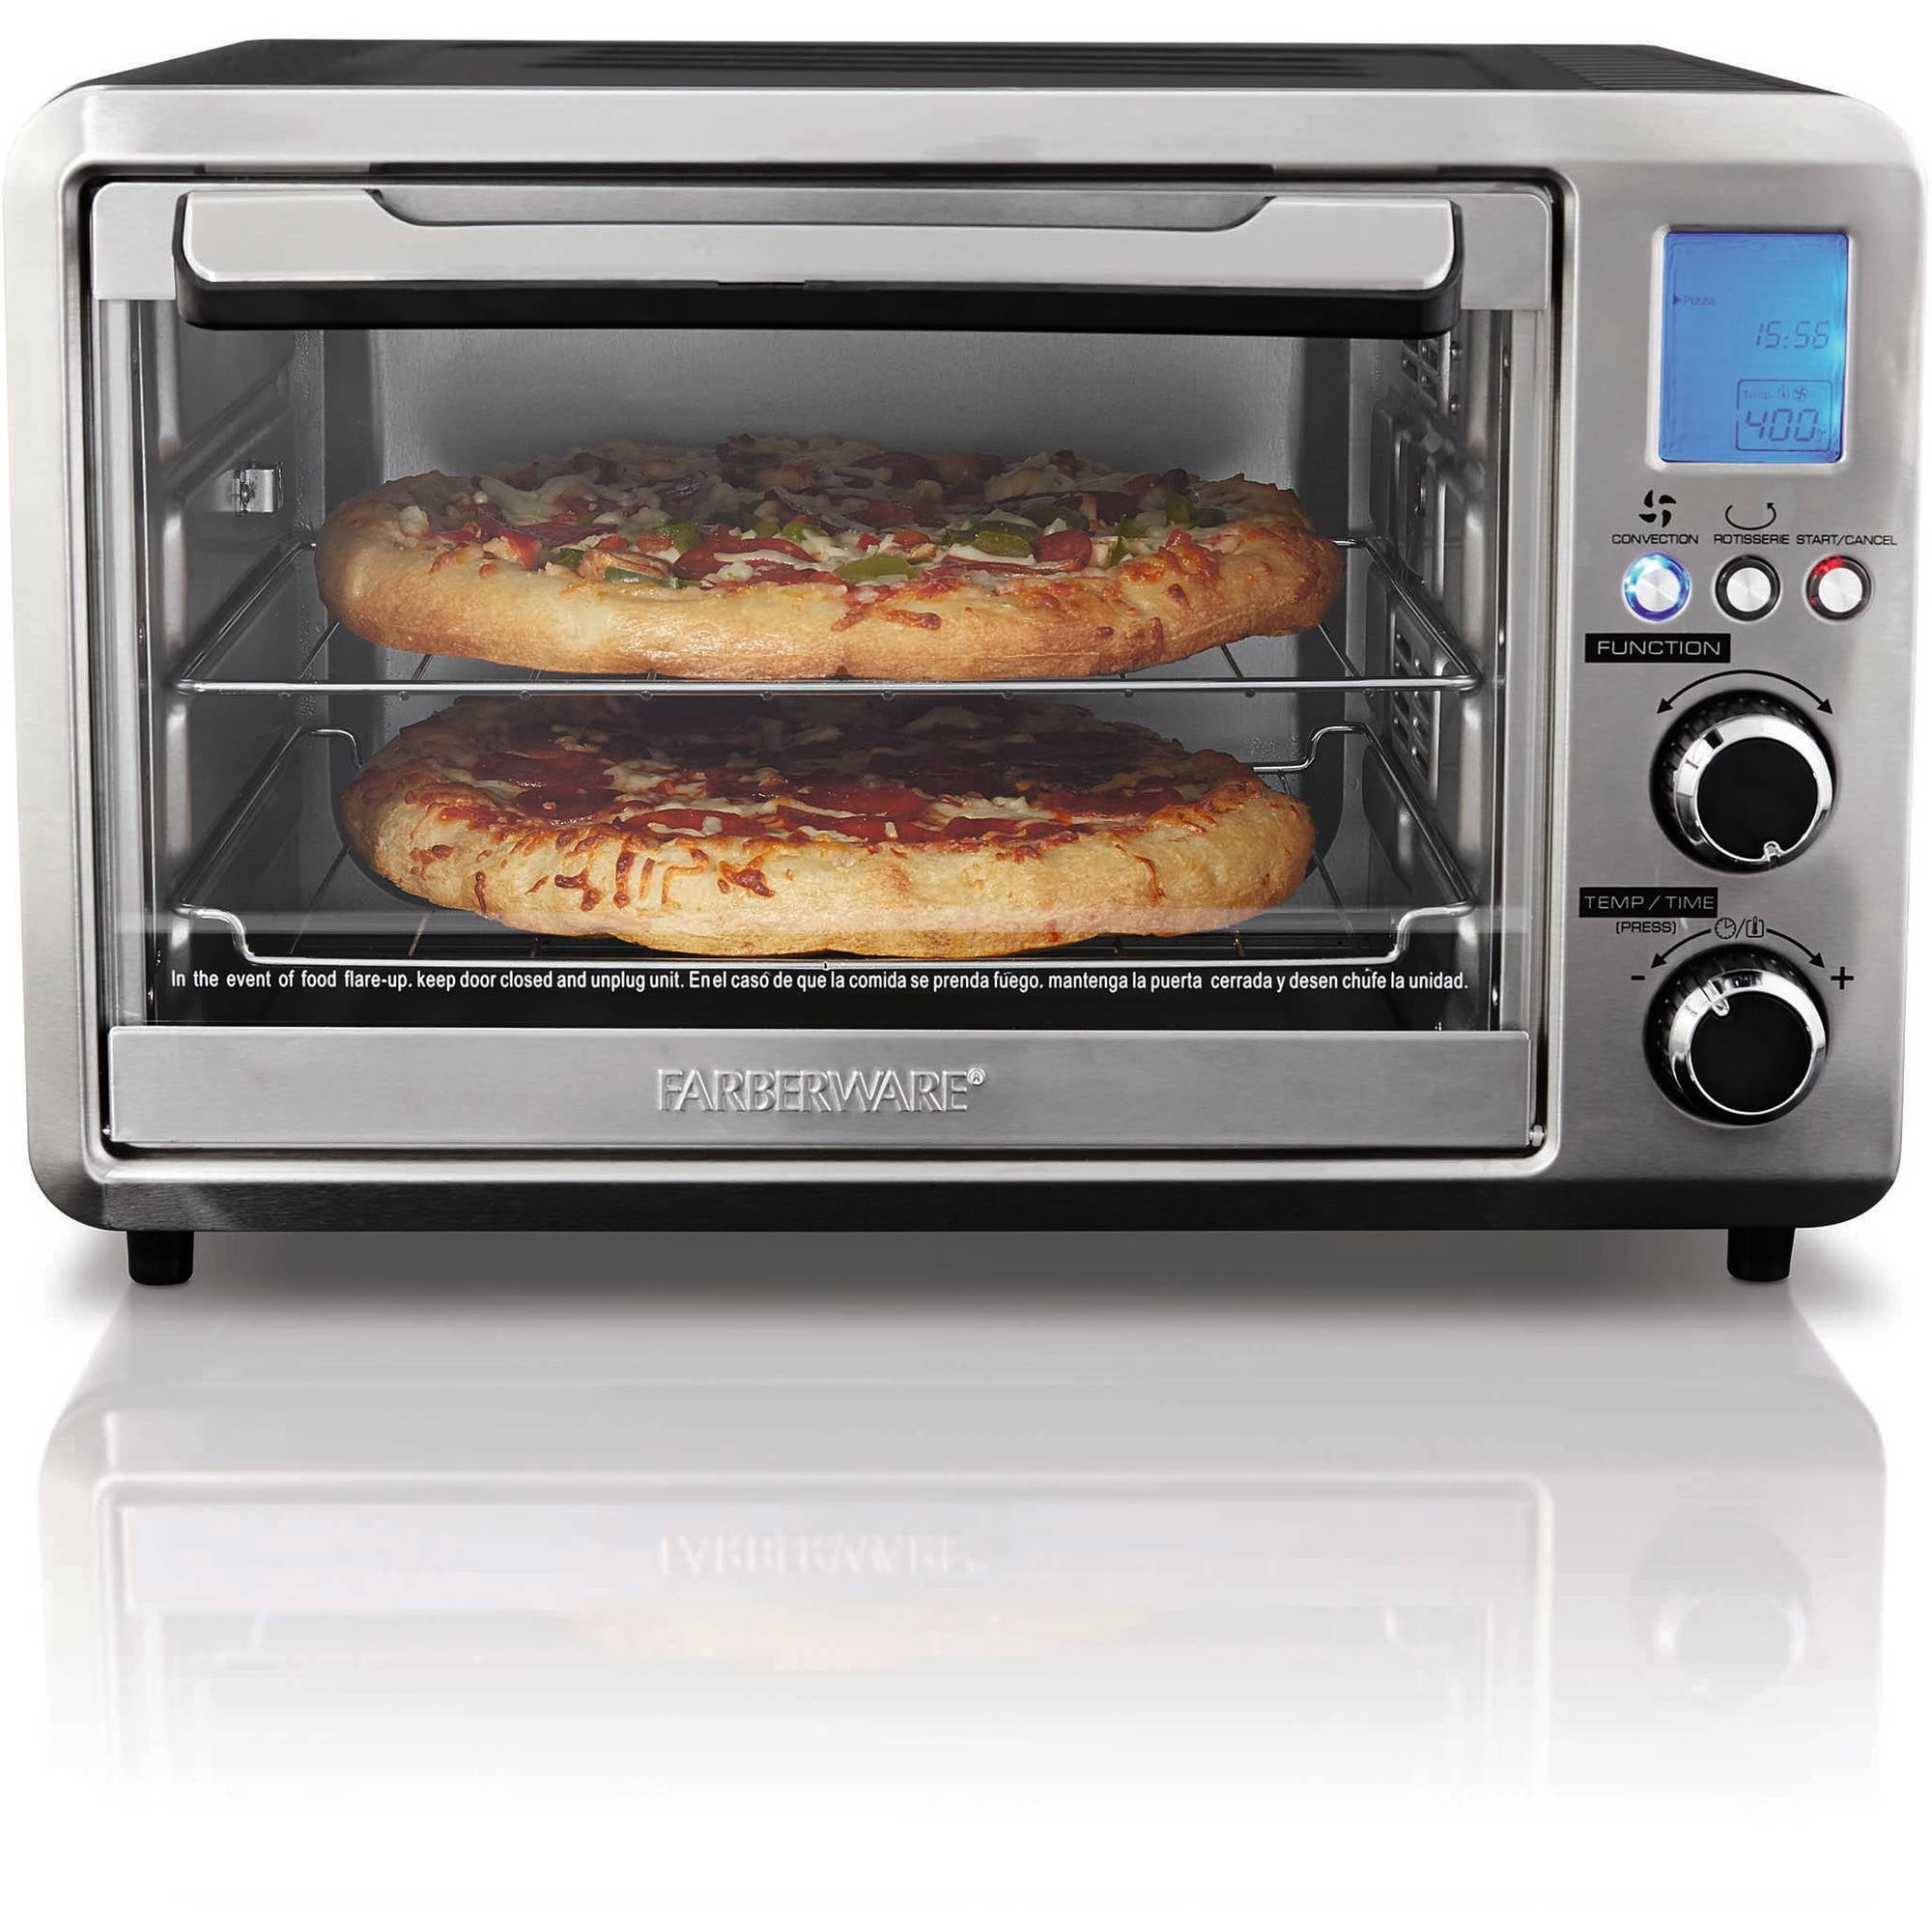 Digital Electric Toaster Oven Convection Cooking Large 25L Kitchen Appliances 